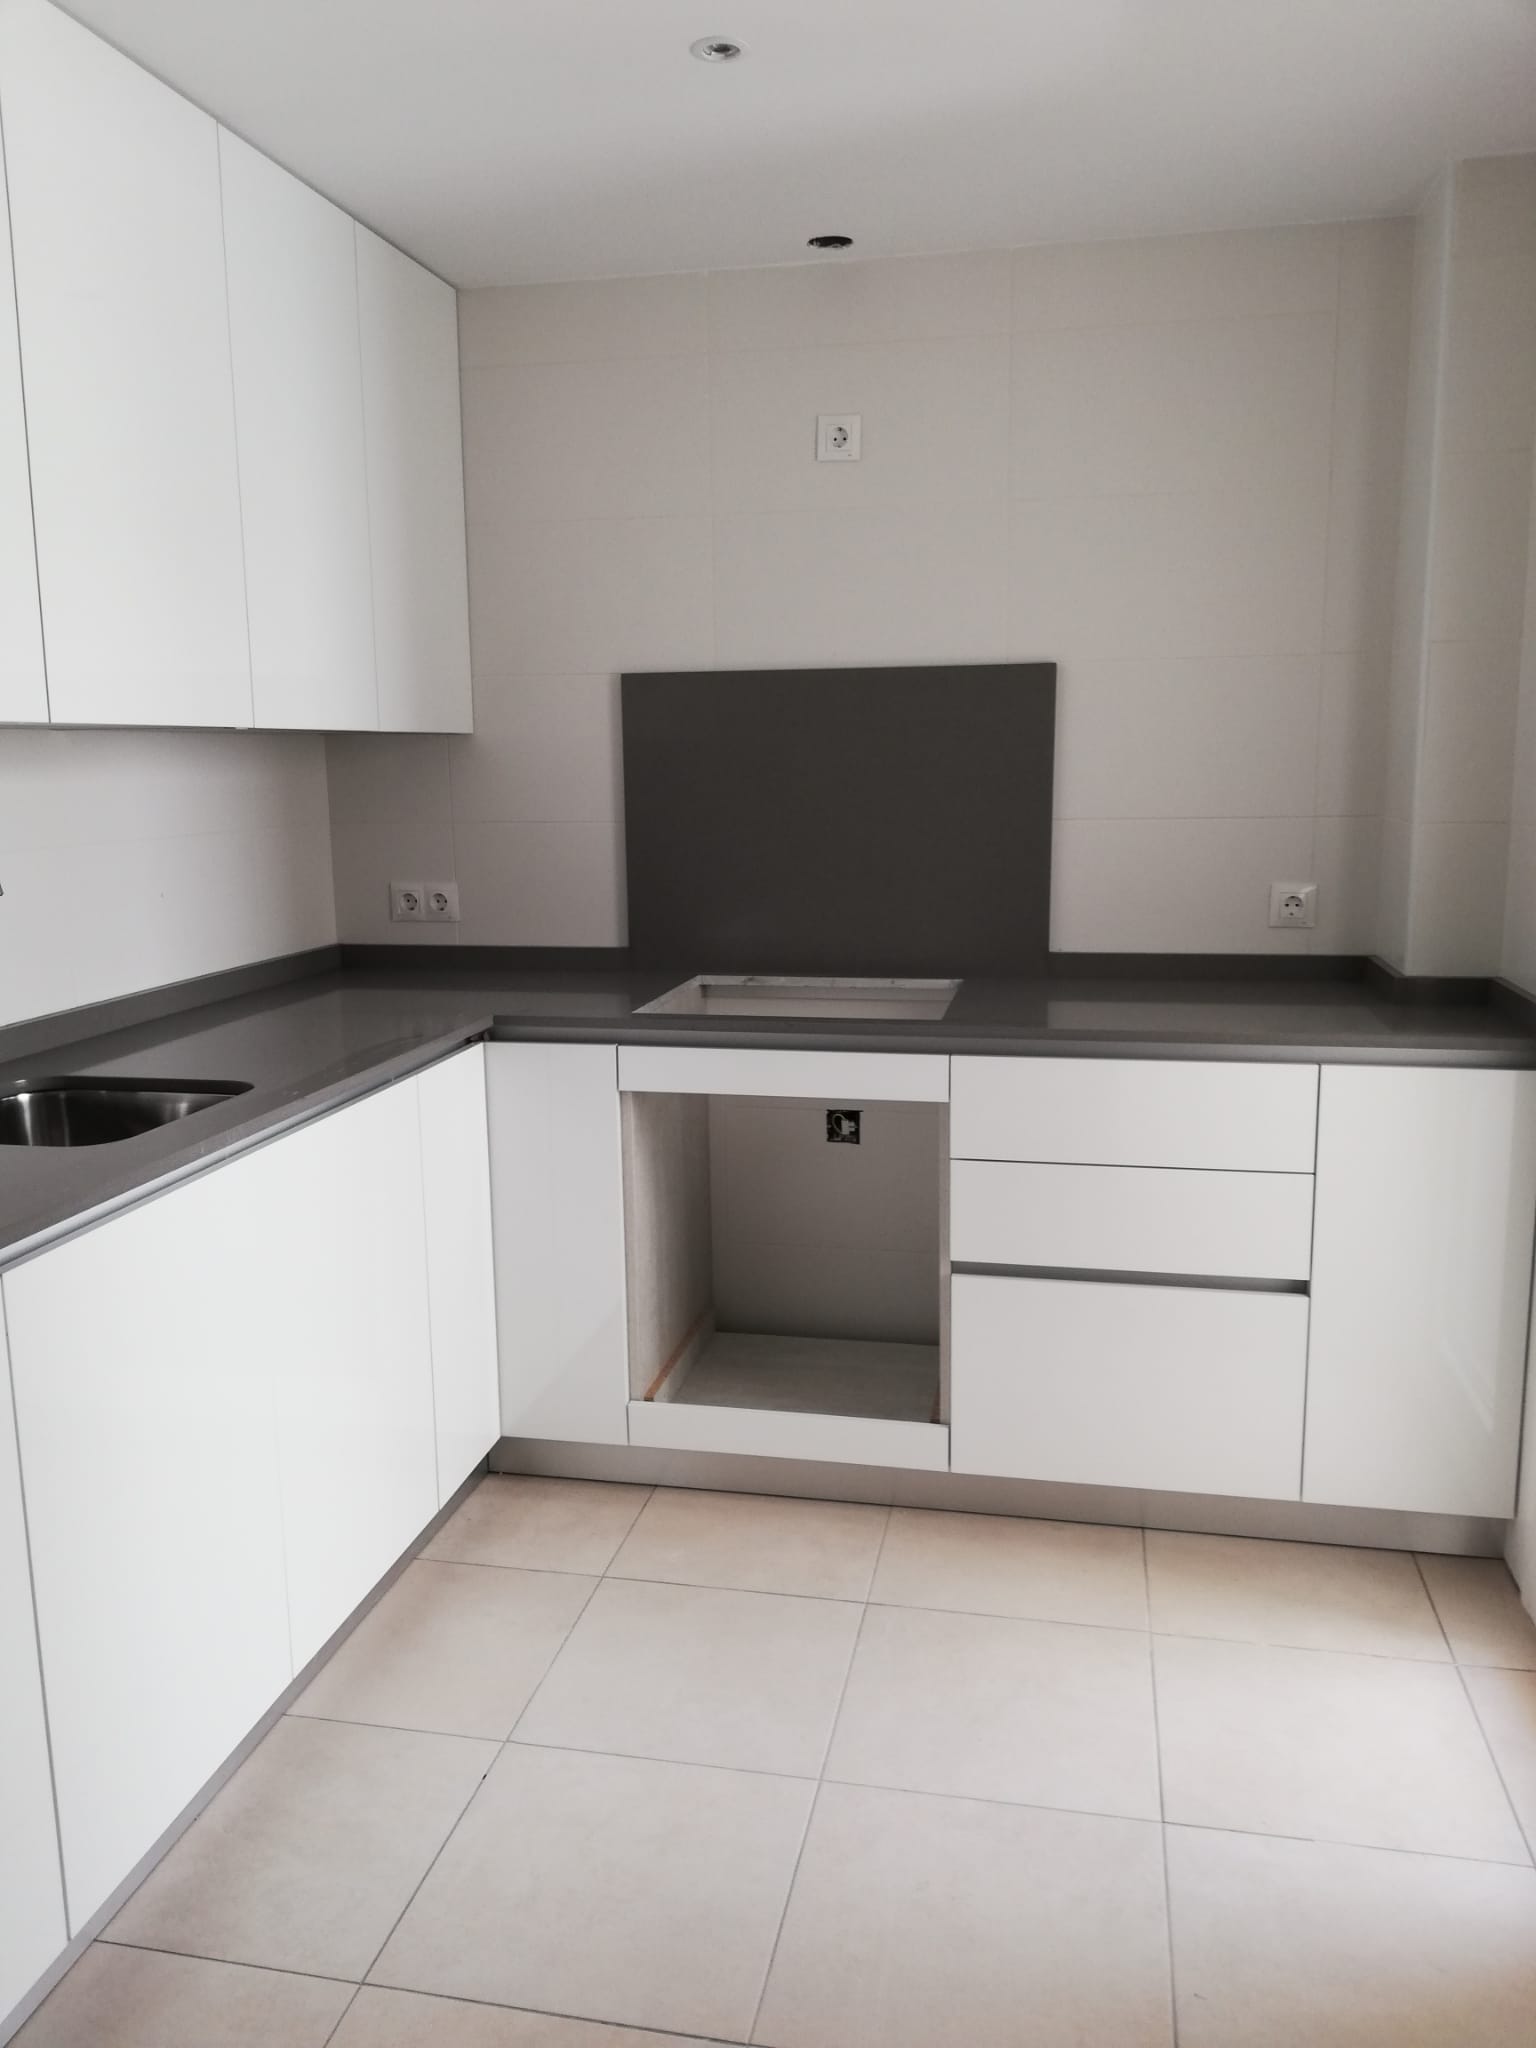 Brand new 3 bedroom apartment for rent in Nueva Andalucía - mibgroup.es